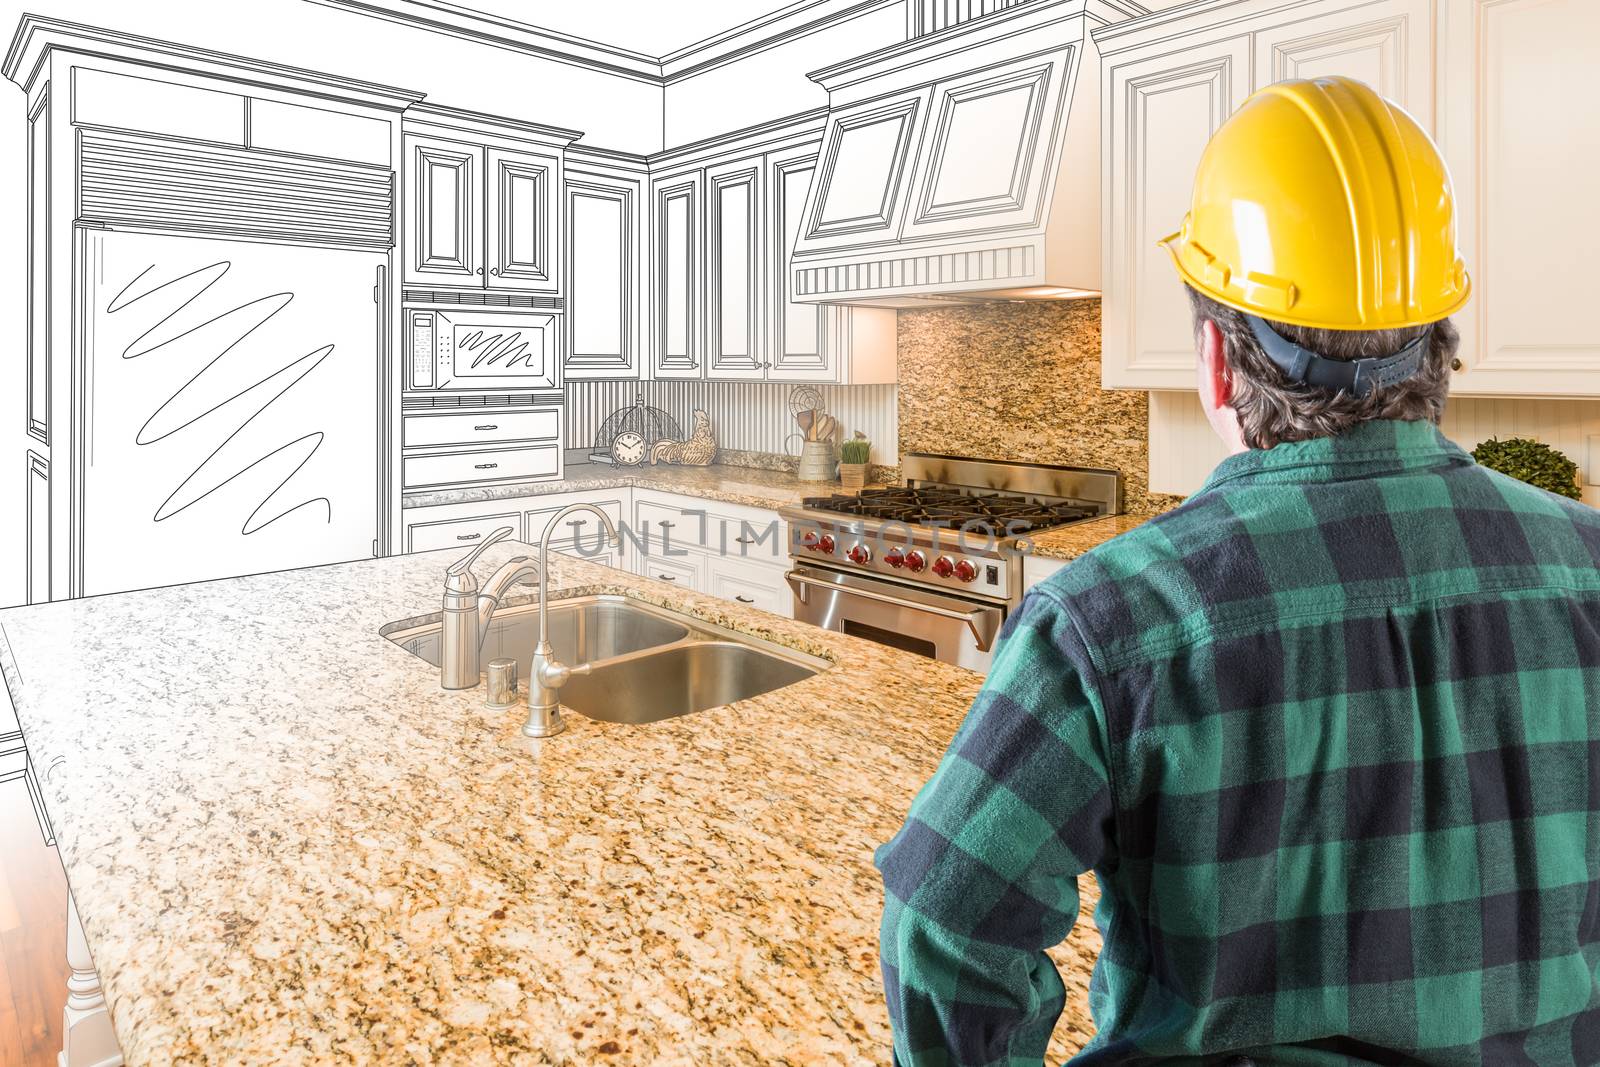 Male Contractor with Hard Hat and Tool Belt Looking At Custom Kitchen Drawing Photo Combination On White. by Feverpitched